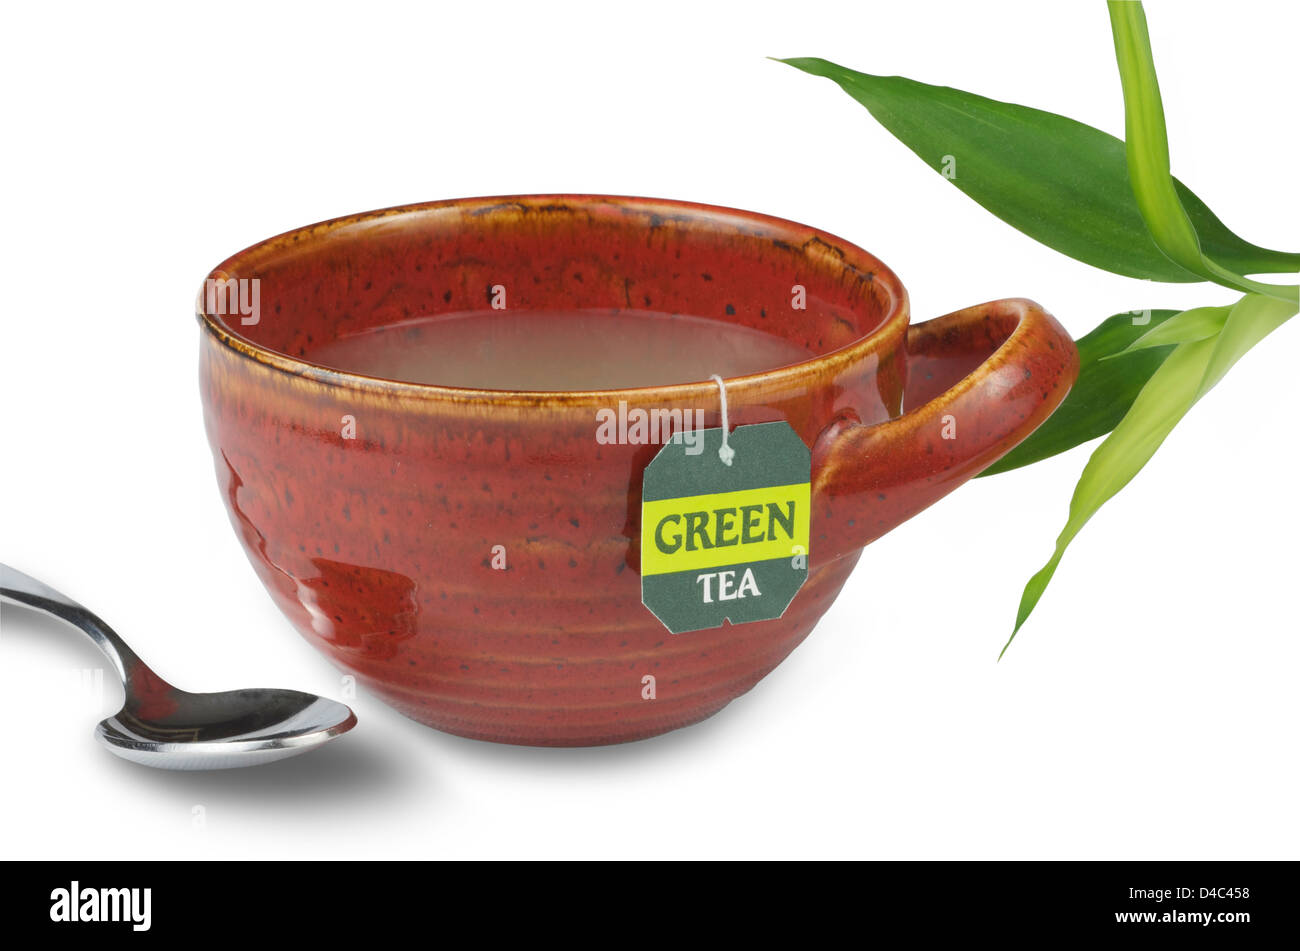 Cup of green tea in a red modern tea cup with spoon and green bamboo sprig. Stock Photo